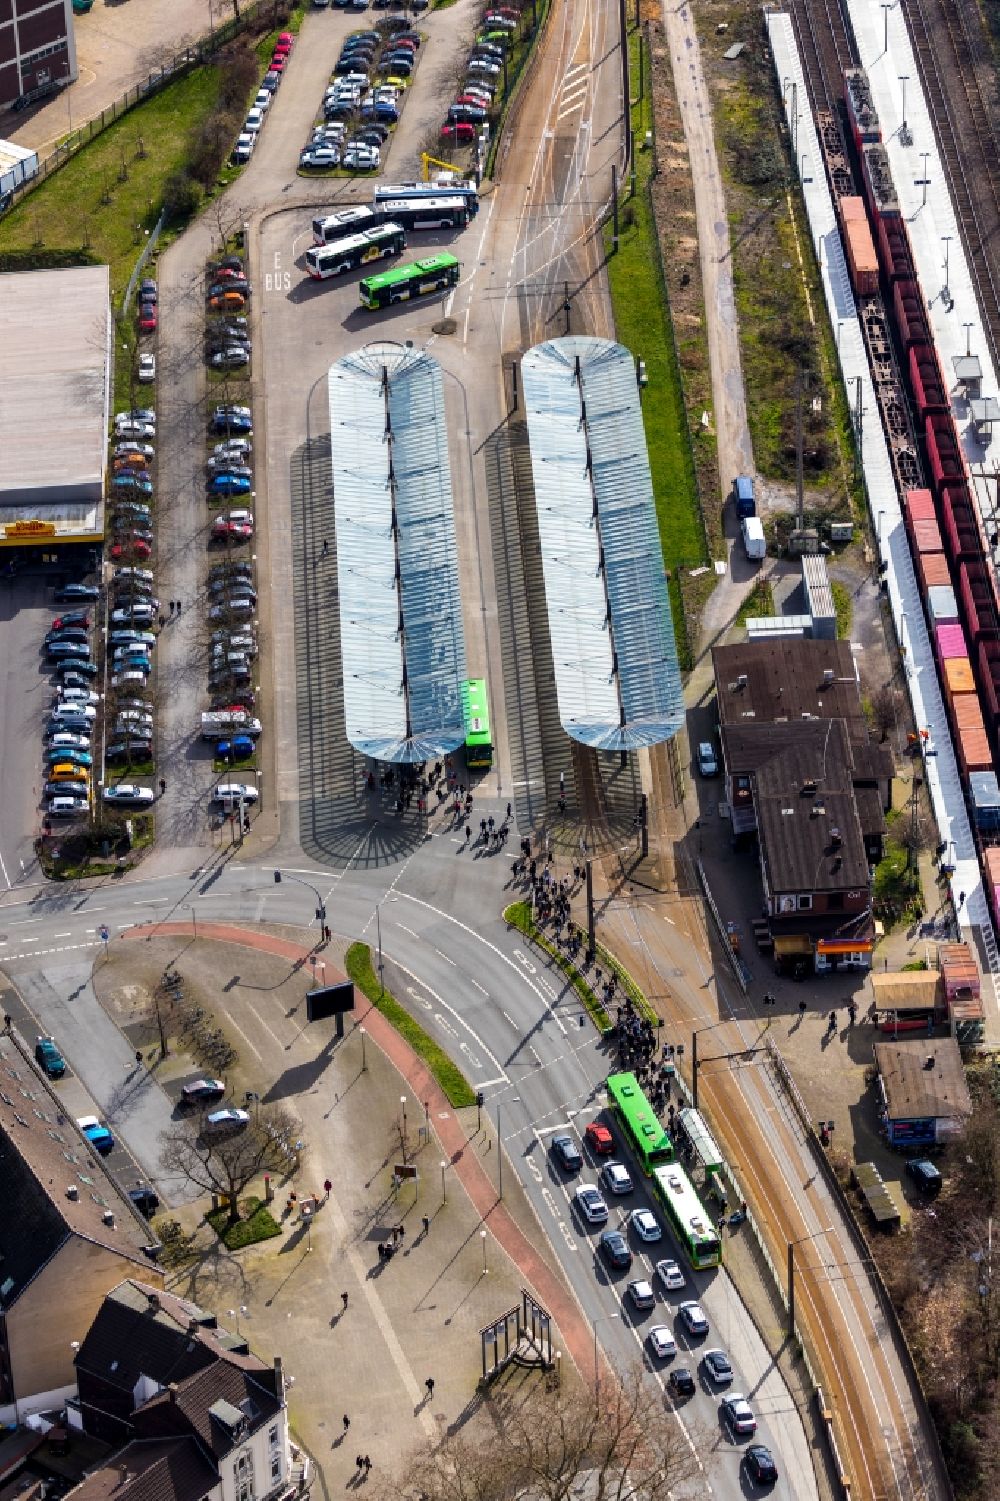 Aerial image Oberhausen - Central Bus Station for Public Transportation on Friedrichstrasse in the district Sterkrade-Nord in Oberhausen in the state North Rhine-Westphalia, Germany